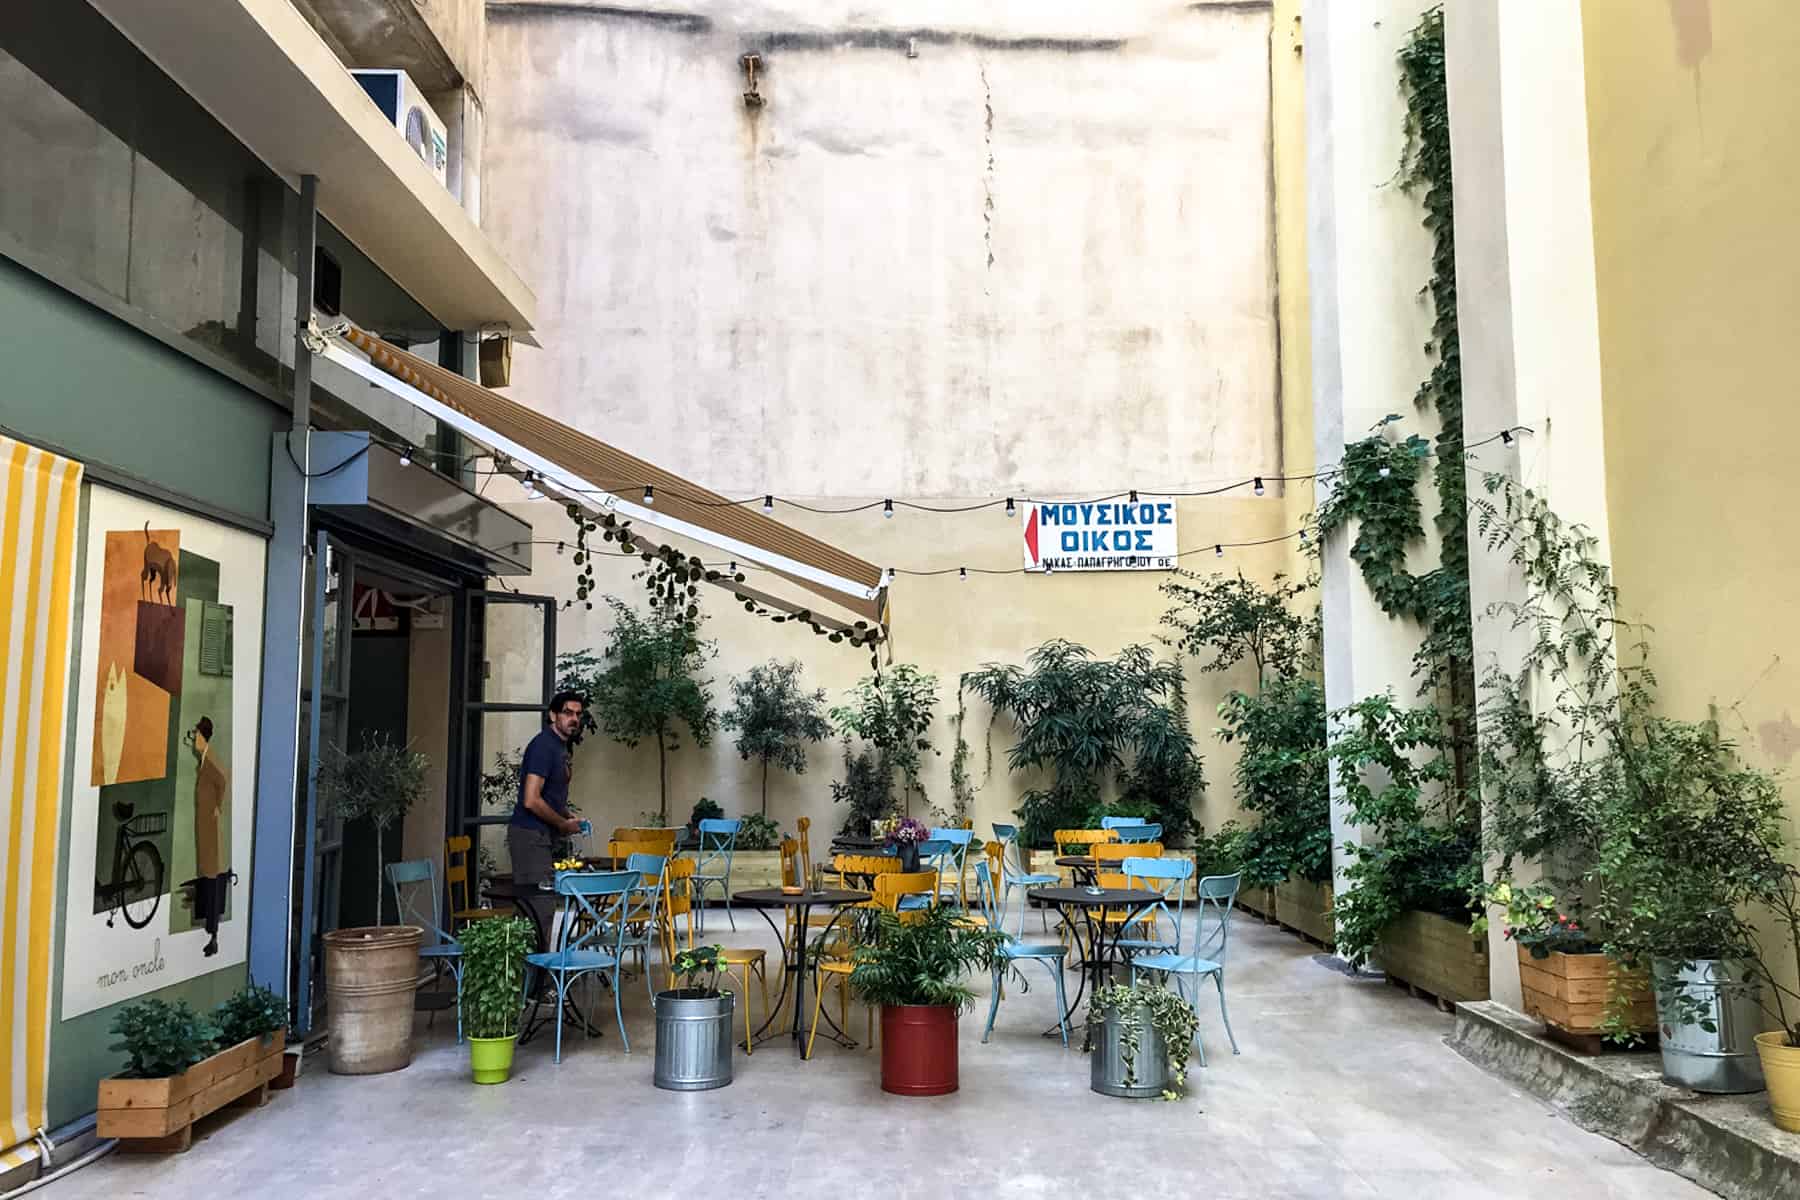 A man stands outside a cafe with blue and yellow chairs, in a quiet alleyway in Athens filled with plants. 